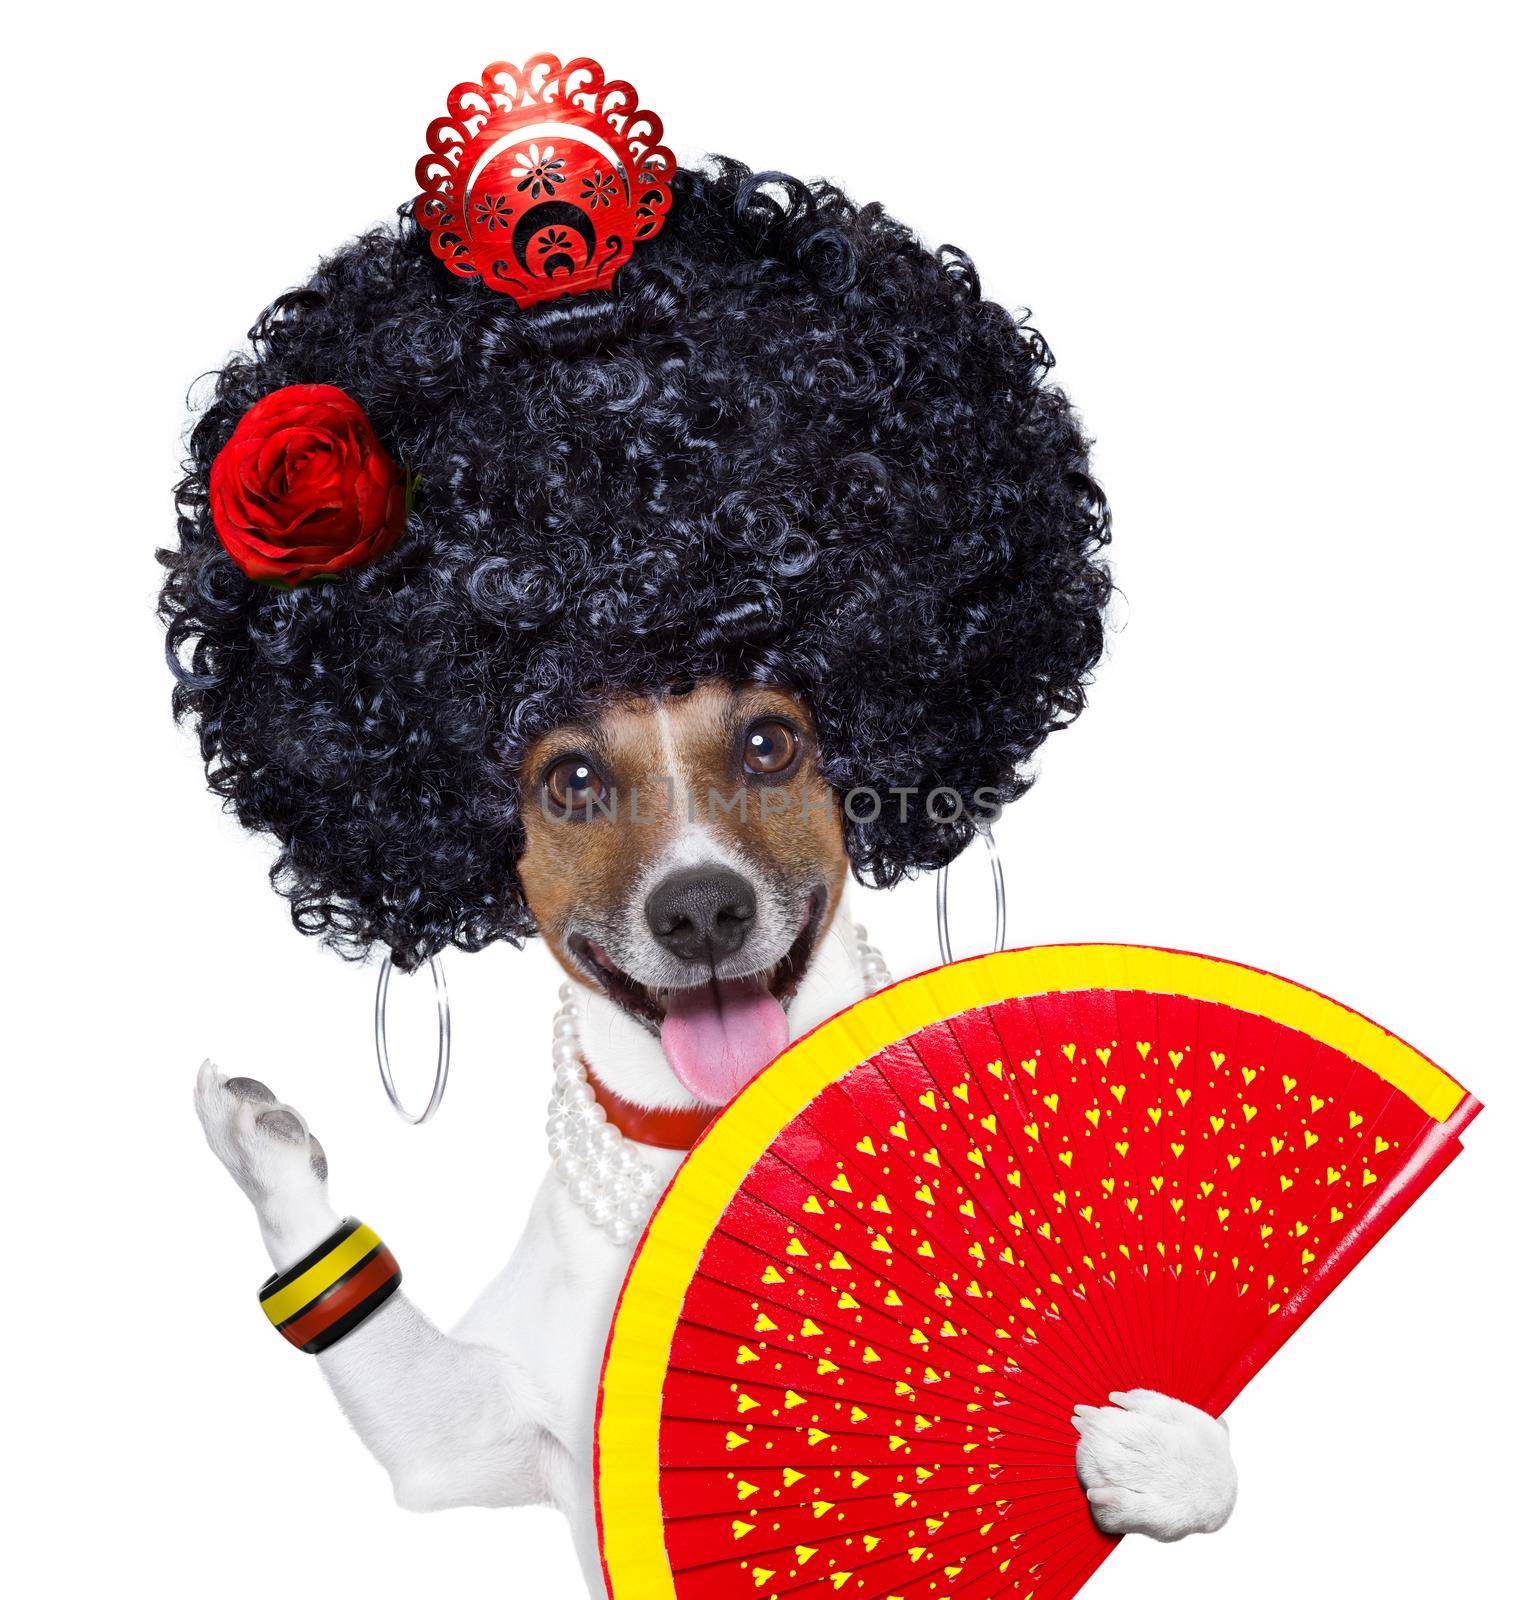 spanish flamenco dog with very big curly hair and hand fan